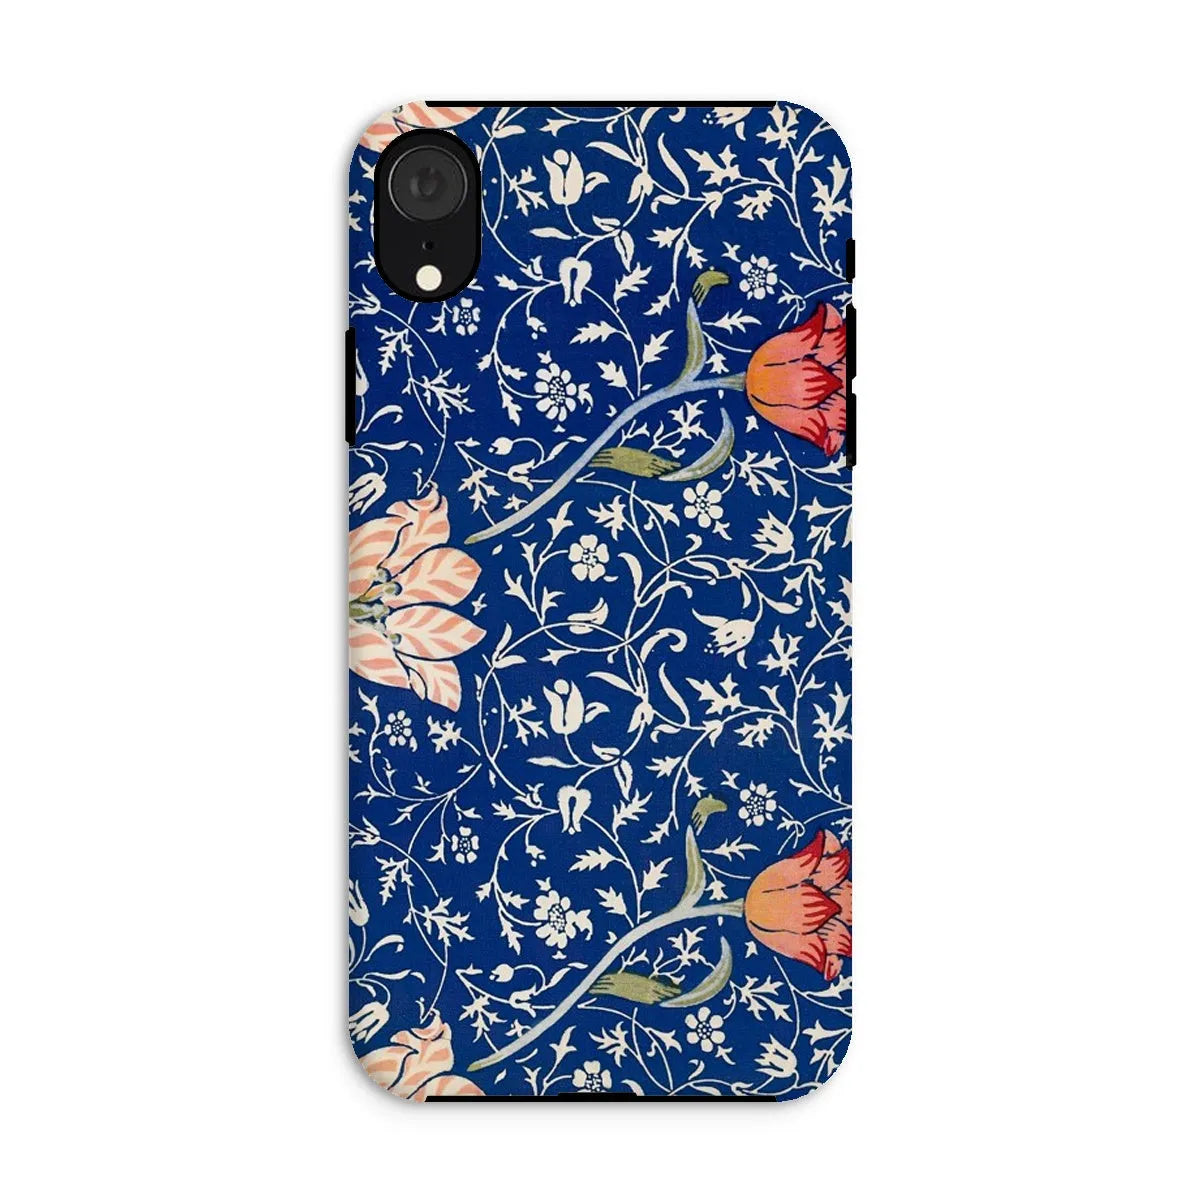 Medway - Floral Aesthetic Art Phone Case - William Morris - Iphone Xr / Matte - Mobile Phone Cases - Aesthetic Art